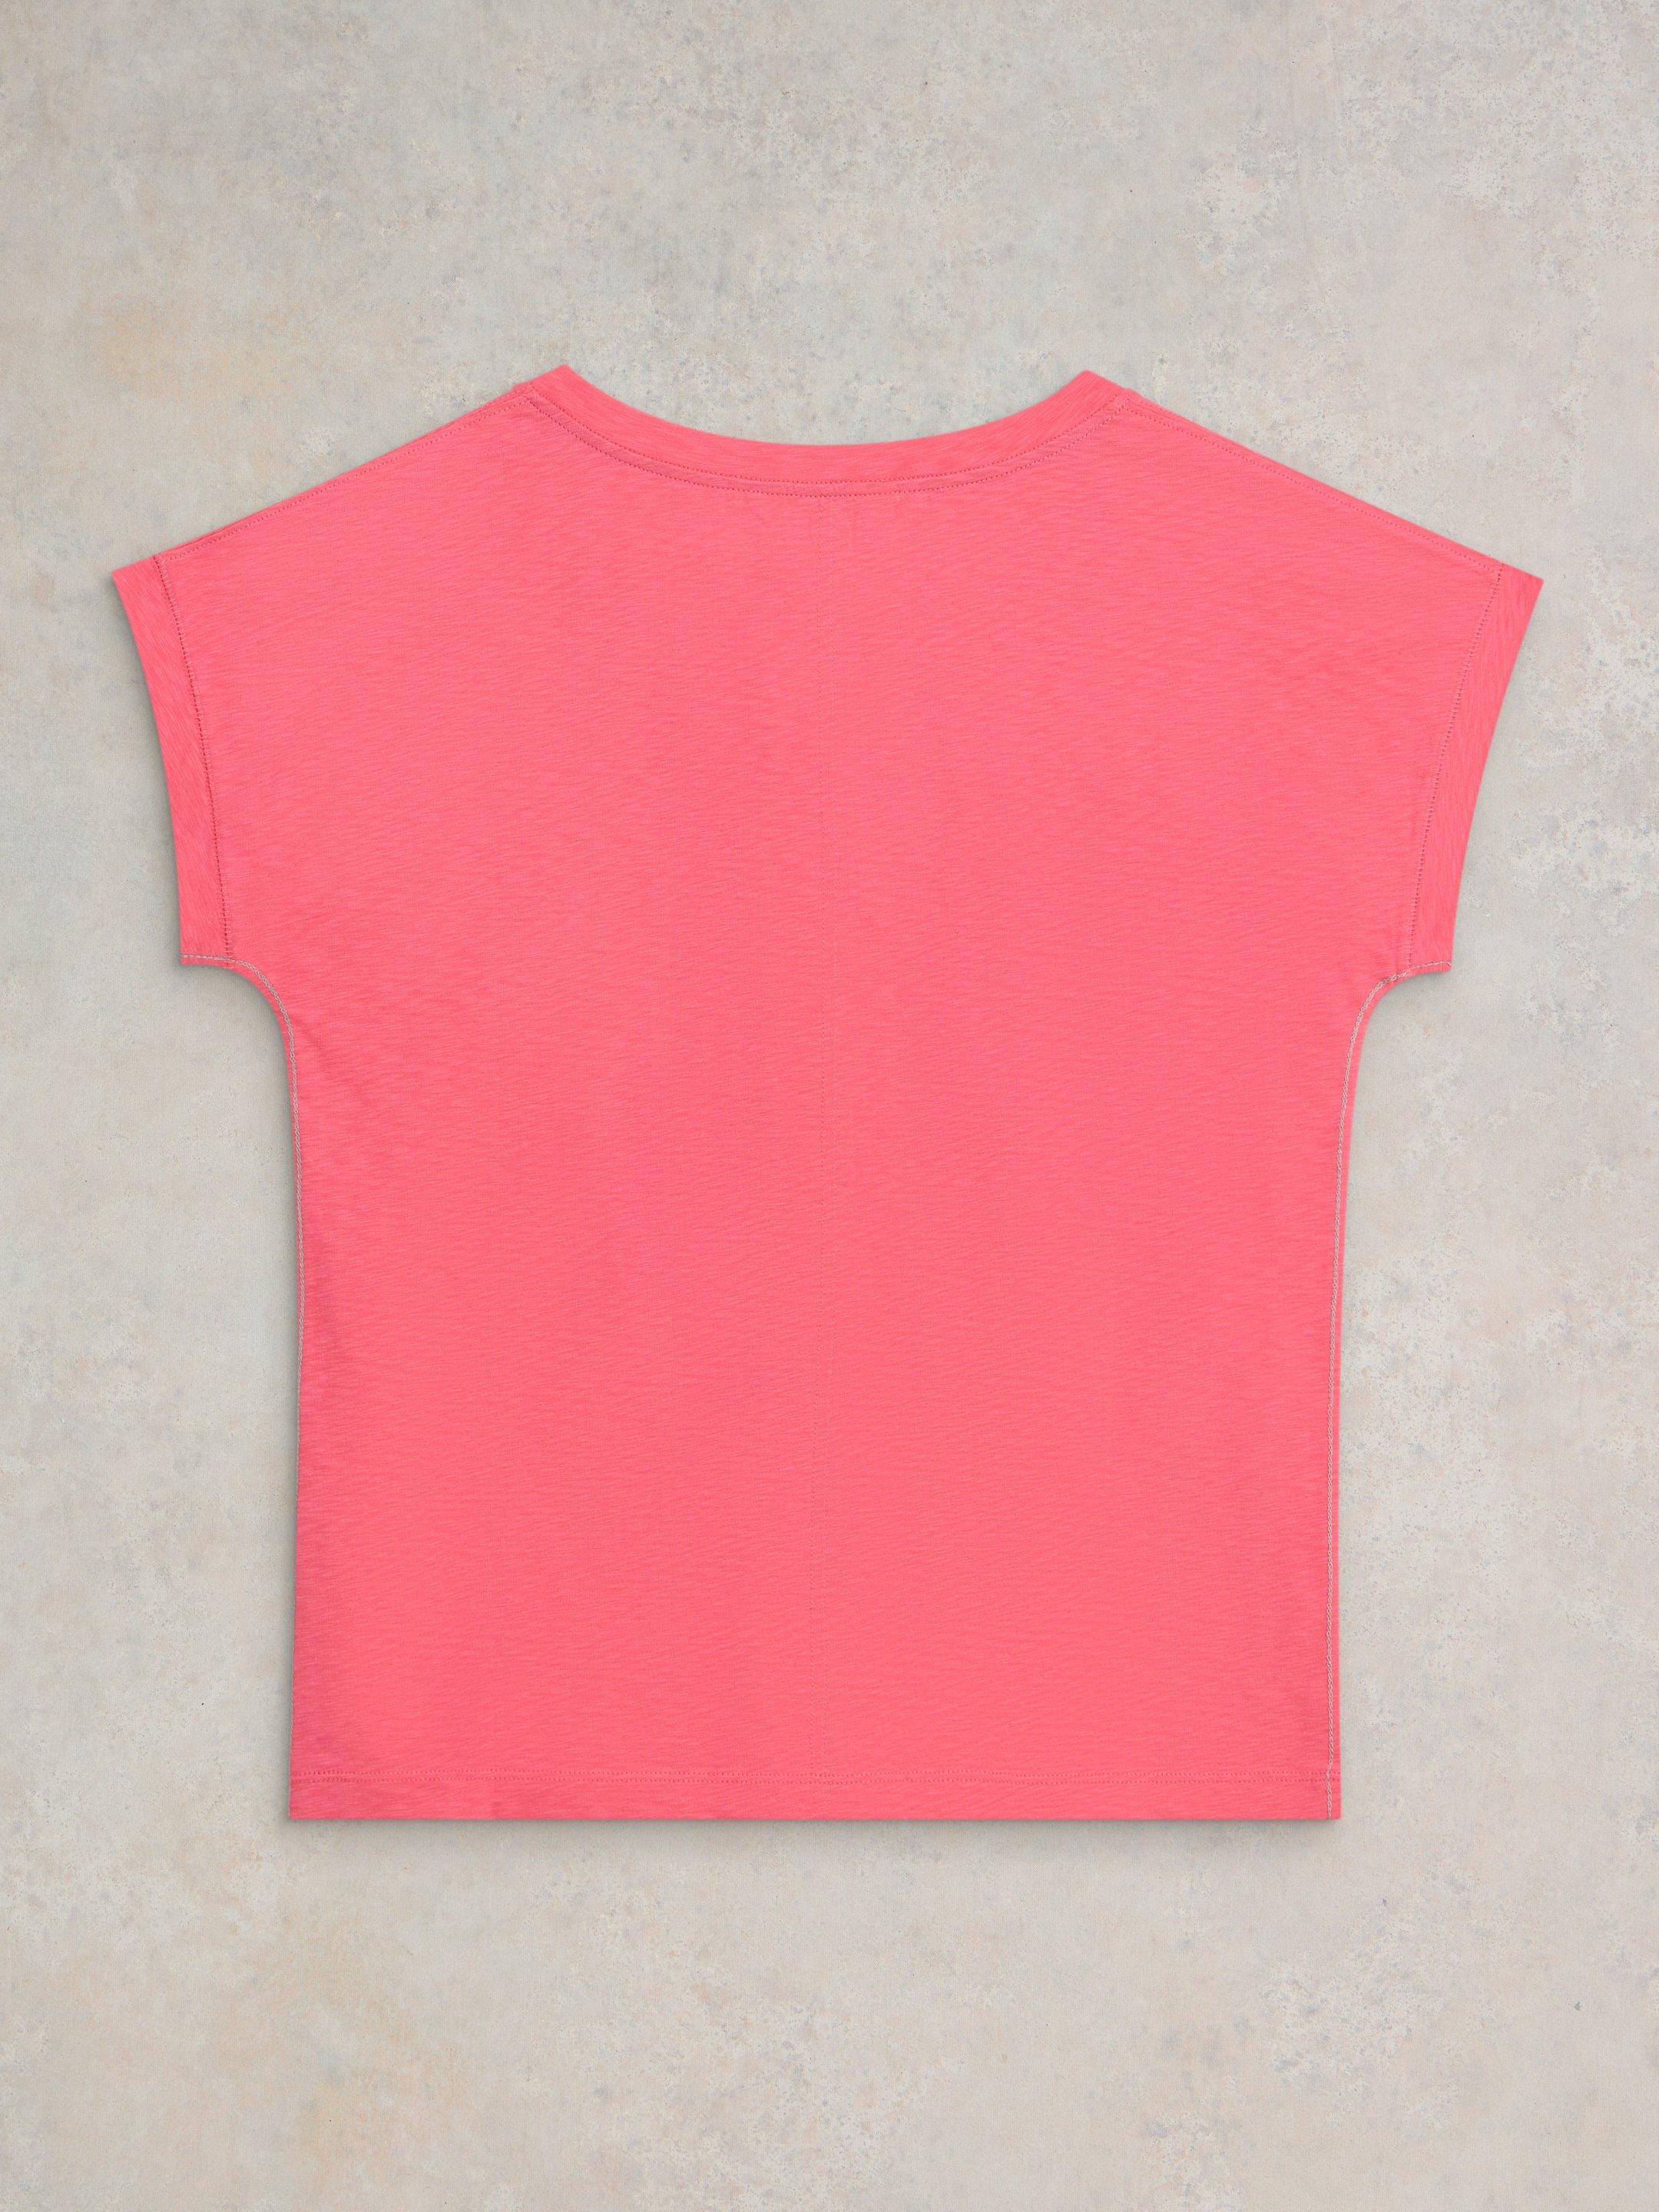 NELLY NOTCH NECK COTTON TEE in LGT PINK - FLAT BACK